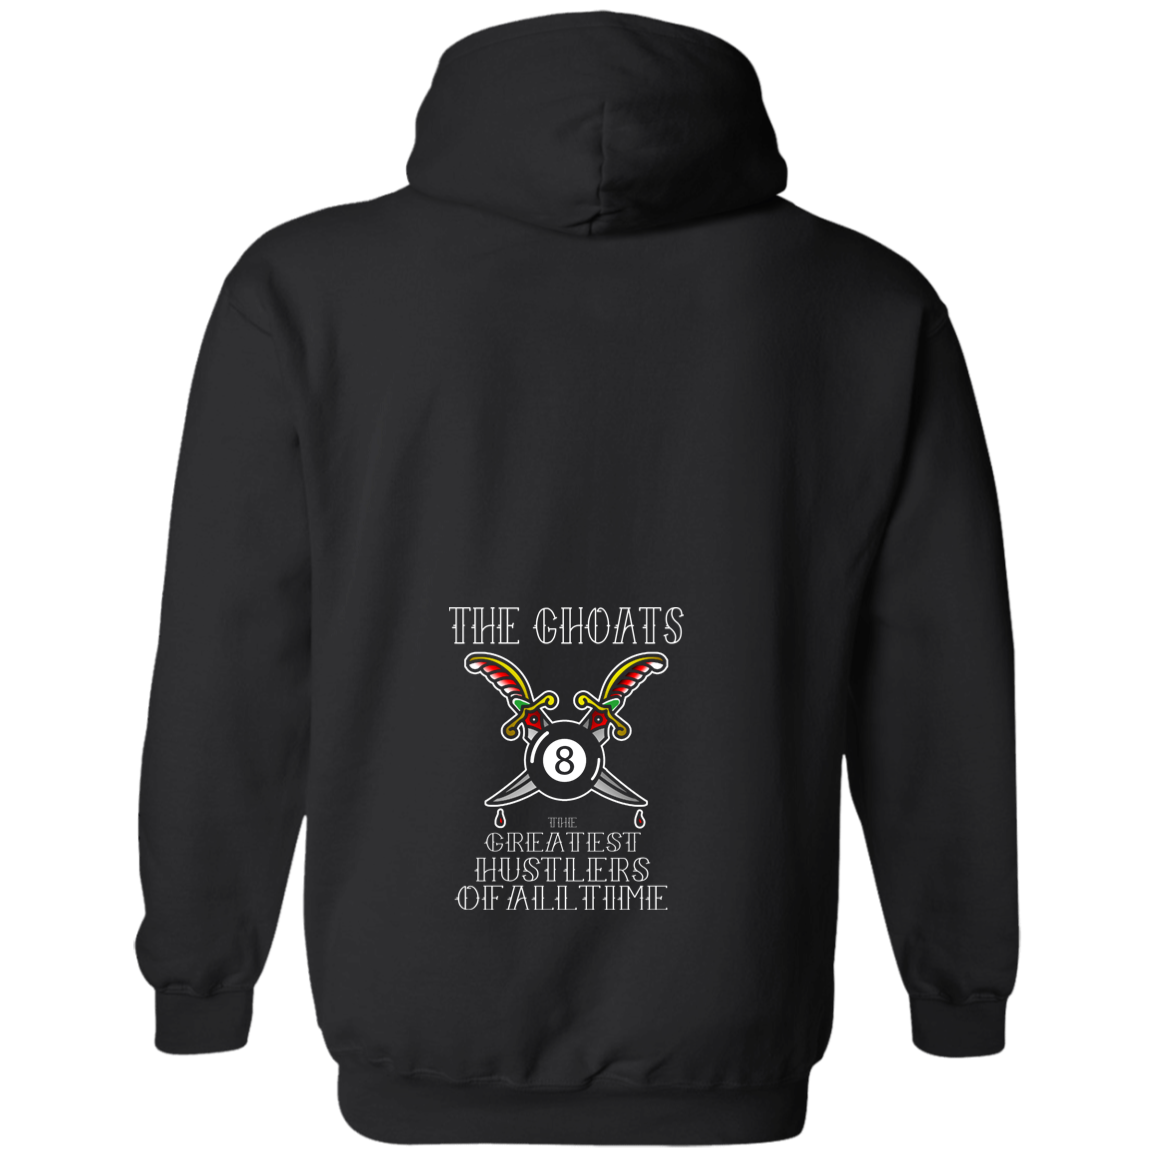 The GHOATS Custom Design #36. Stay Ready Won't Have to Get Ready. Tattoo Style. Ver. 1/2. Basic Pullover Hoodie